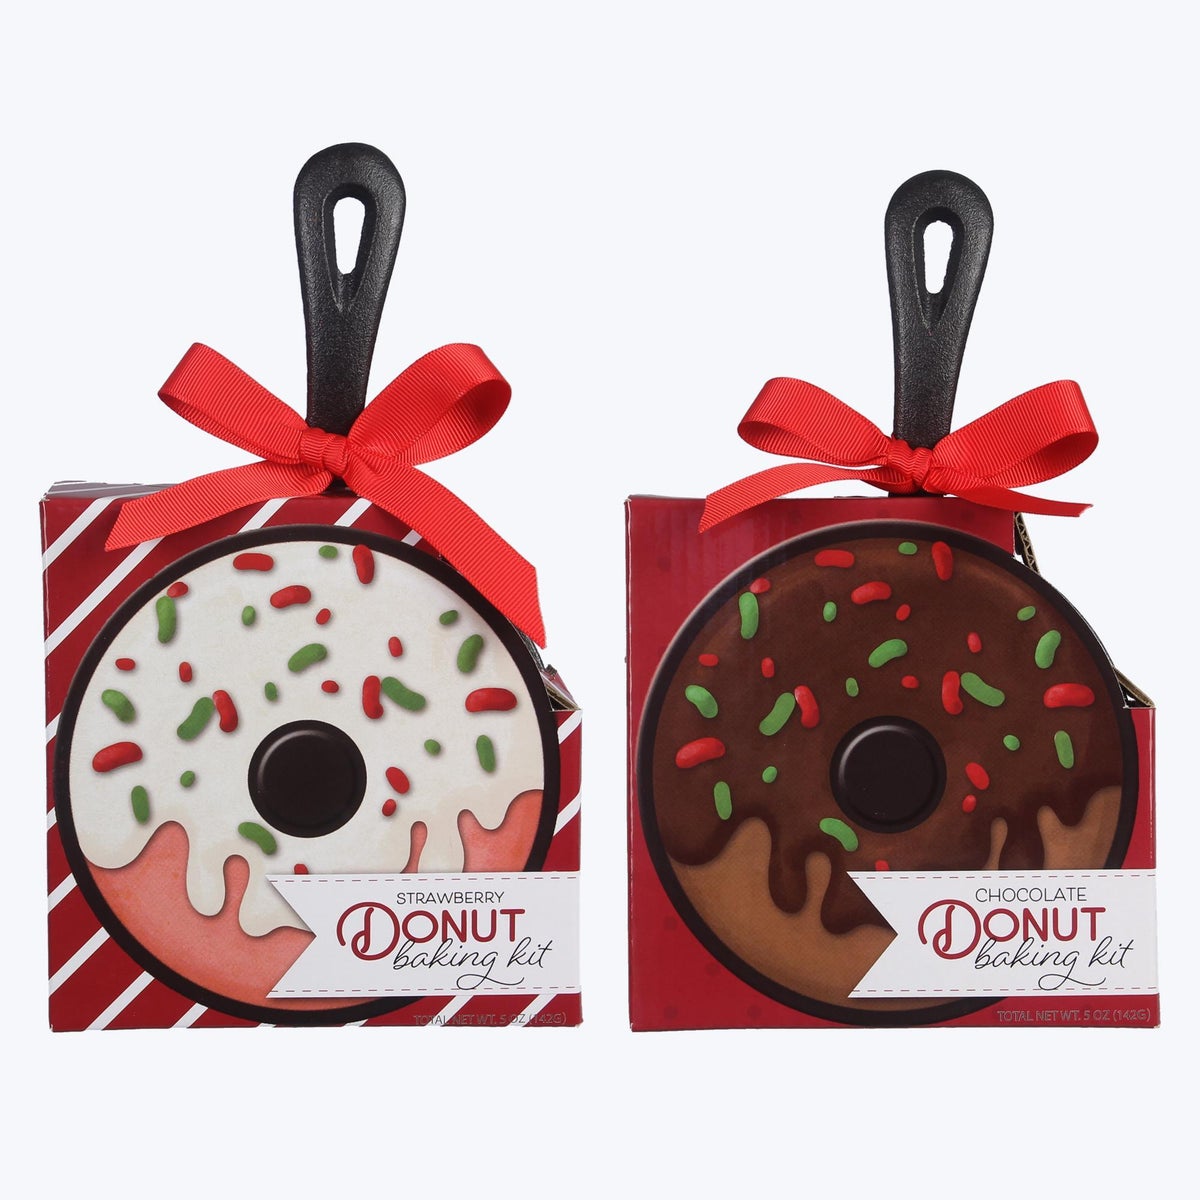 Cast Iron Skillet with Chocolate/Strawberry Donut Baking Mix set. 2 Assorted